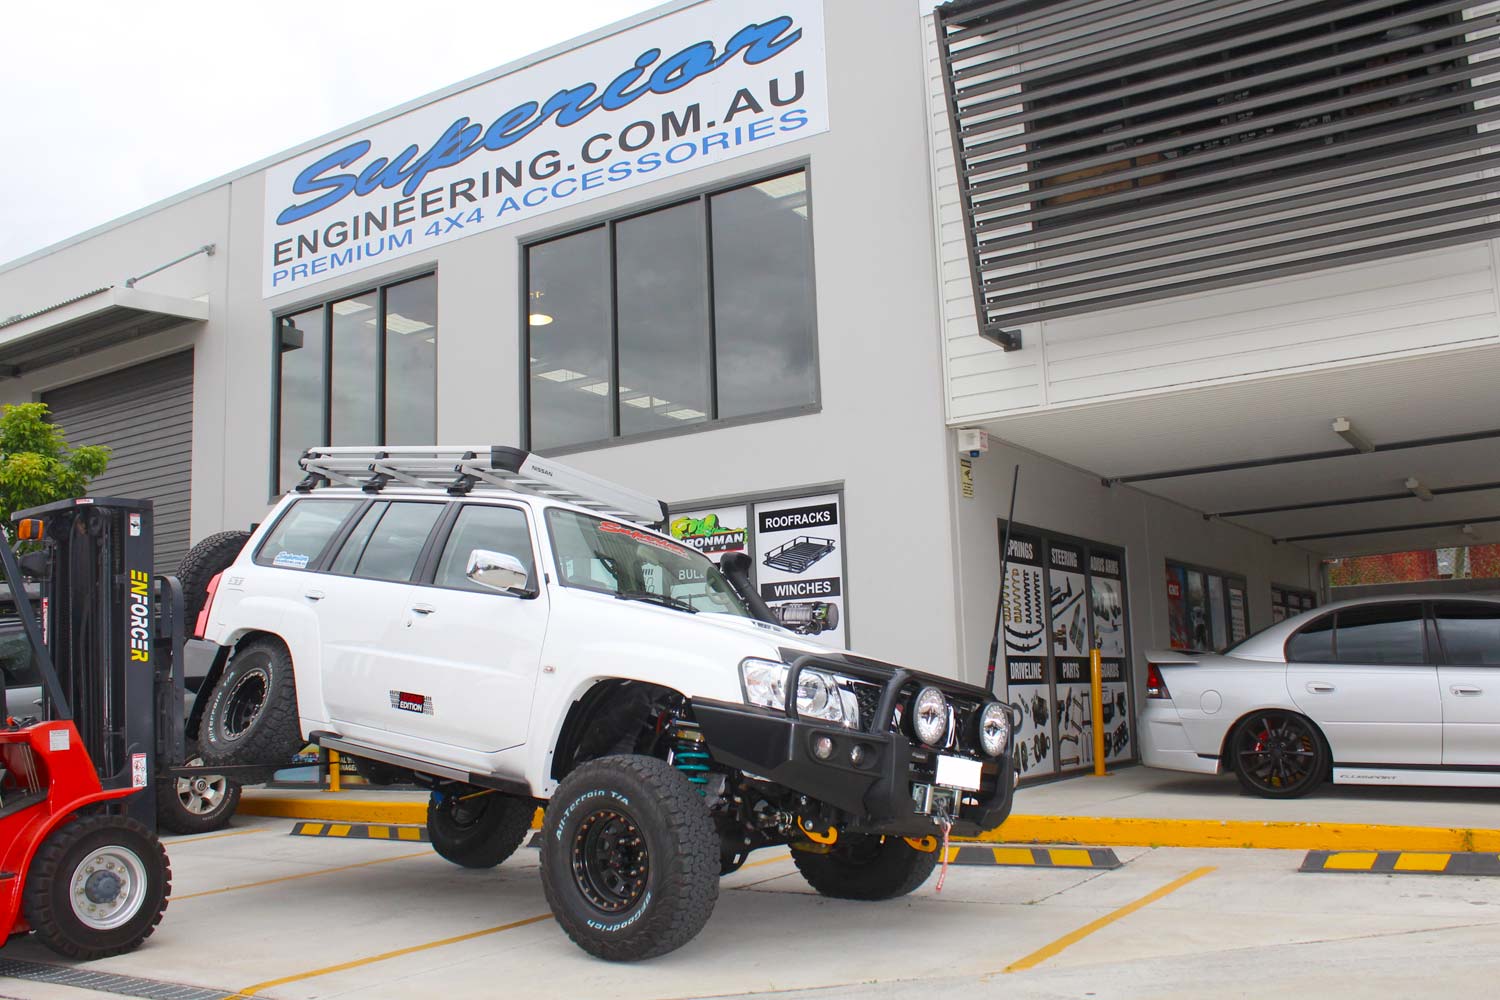 Testing out the rear flex of the GU Nissan Patrol wagon with the forklift at the front of the Superior Engineering 4x4 retail showroom at Deception Bay